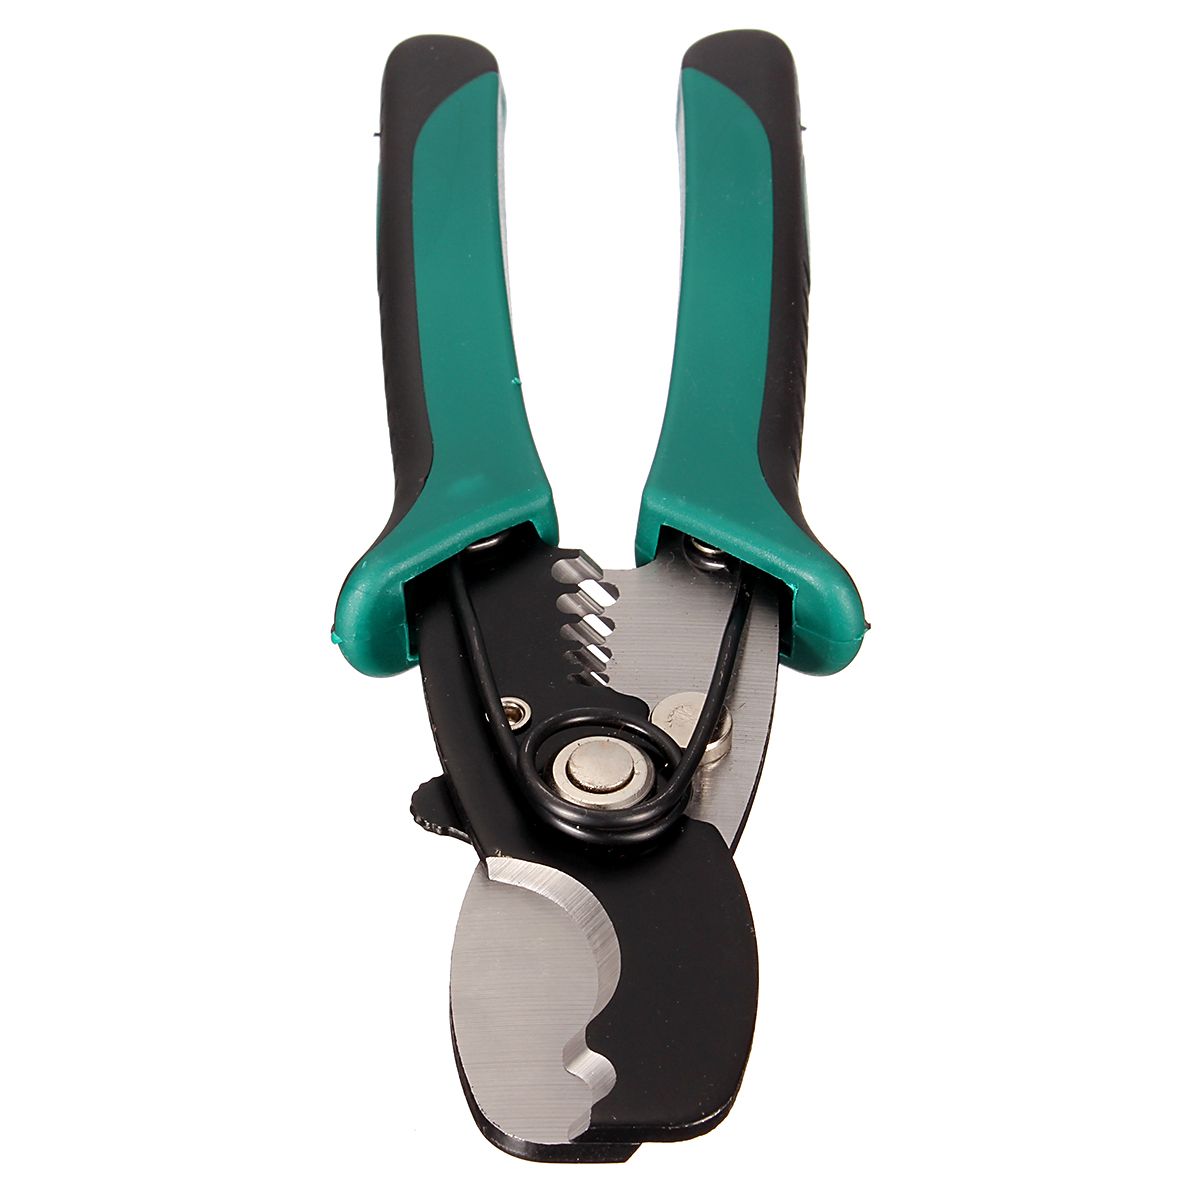 TUOSEN-8inch-Wire-Stripper-Cable-Cutting-Scissor-Stripping-Pliers-Cutter-16-40mm-Hand-Tools-1122936